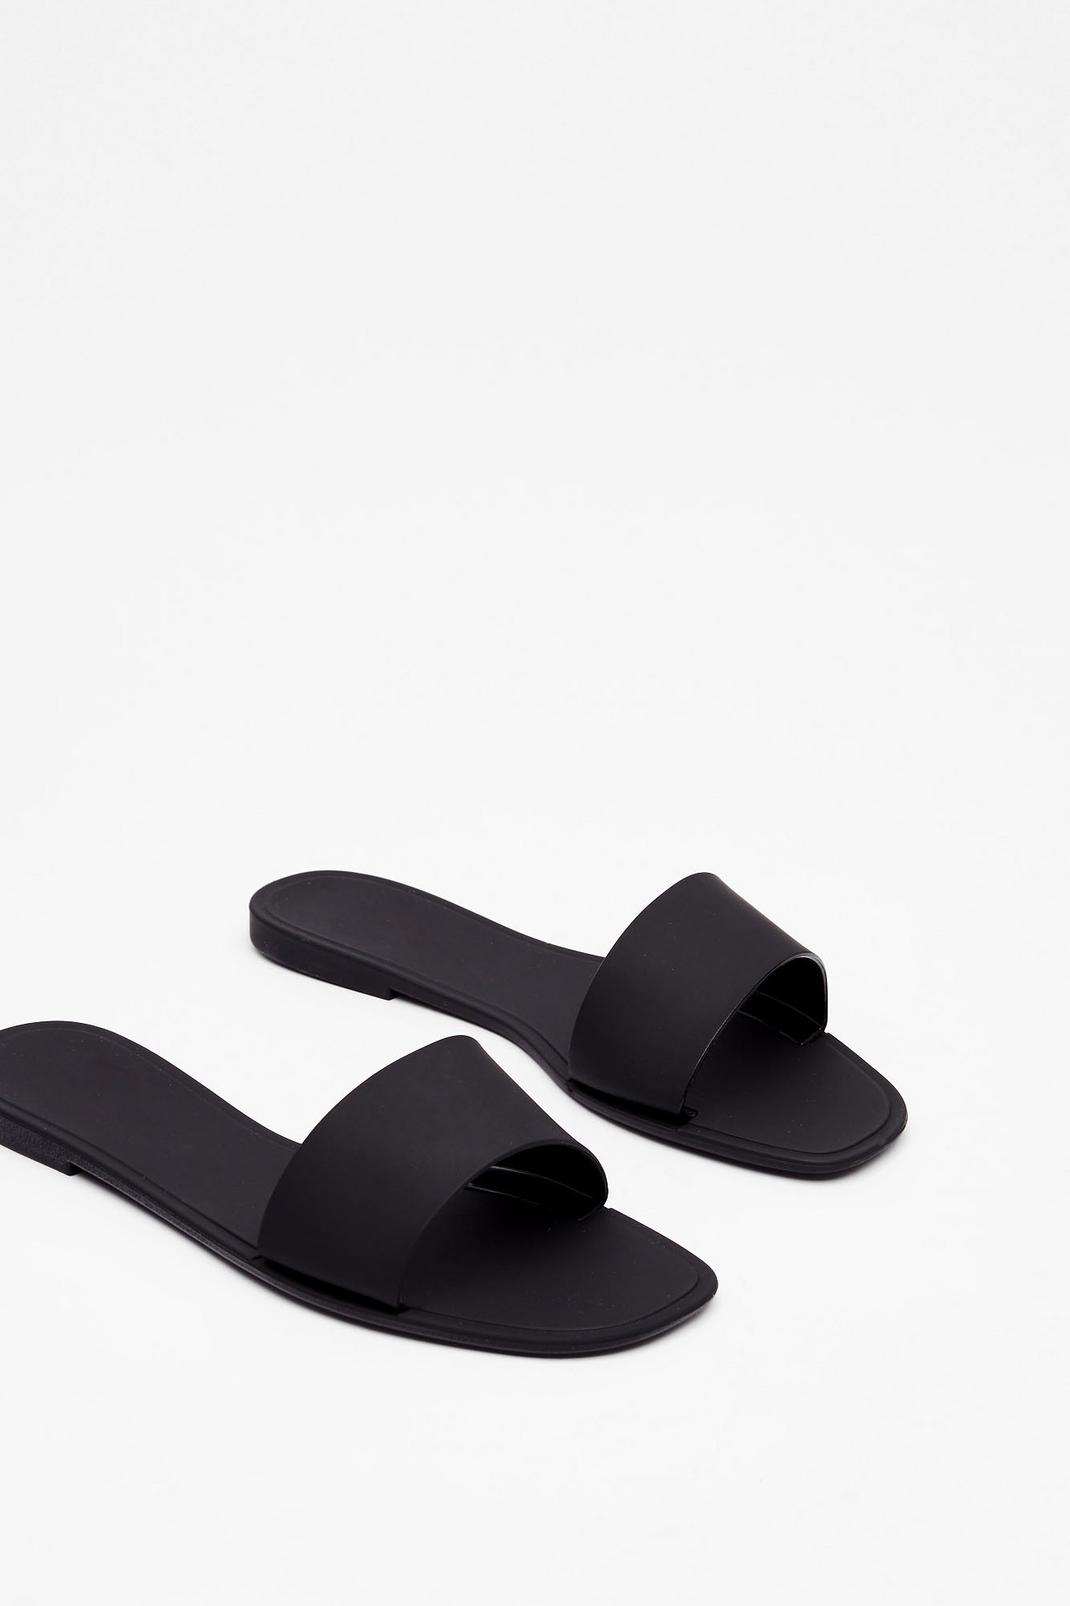 Black Faux Leather Square Toe Sliders image number 1